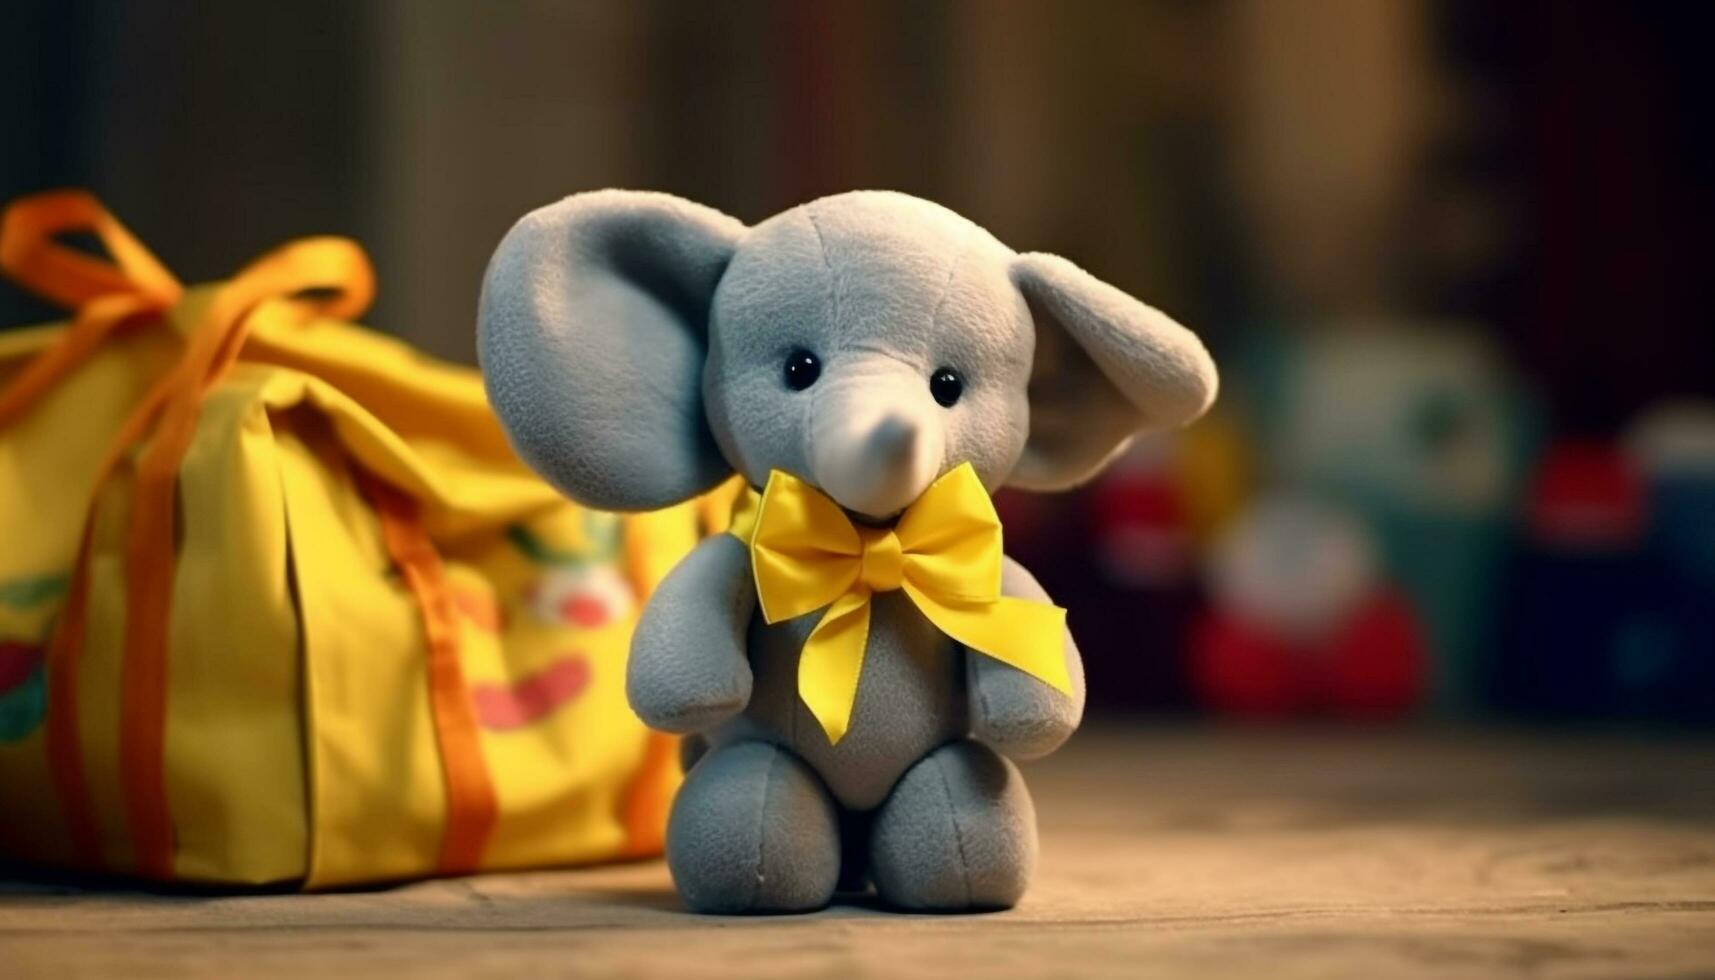 Cute toy elephant on wooden table, a joyful childhood gift generated by AI photo